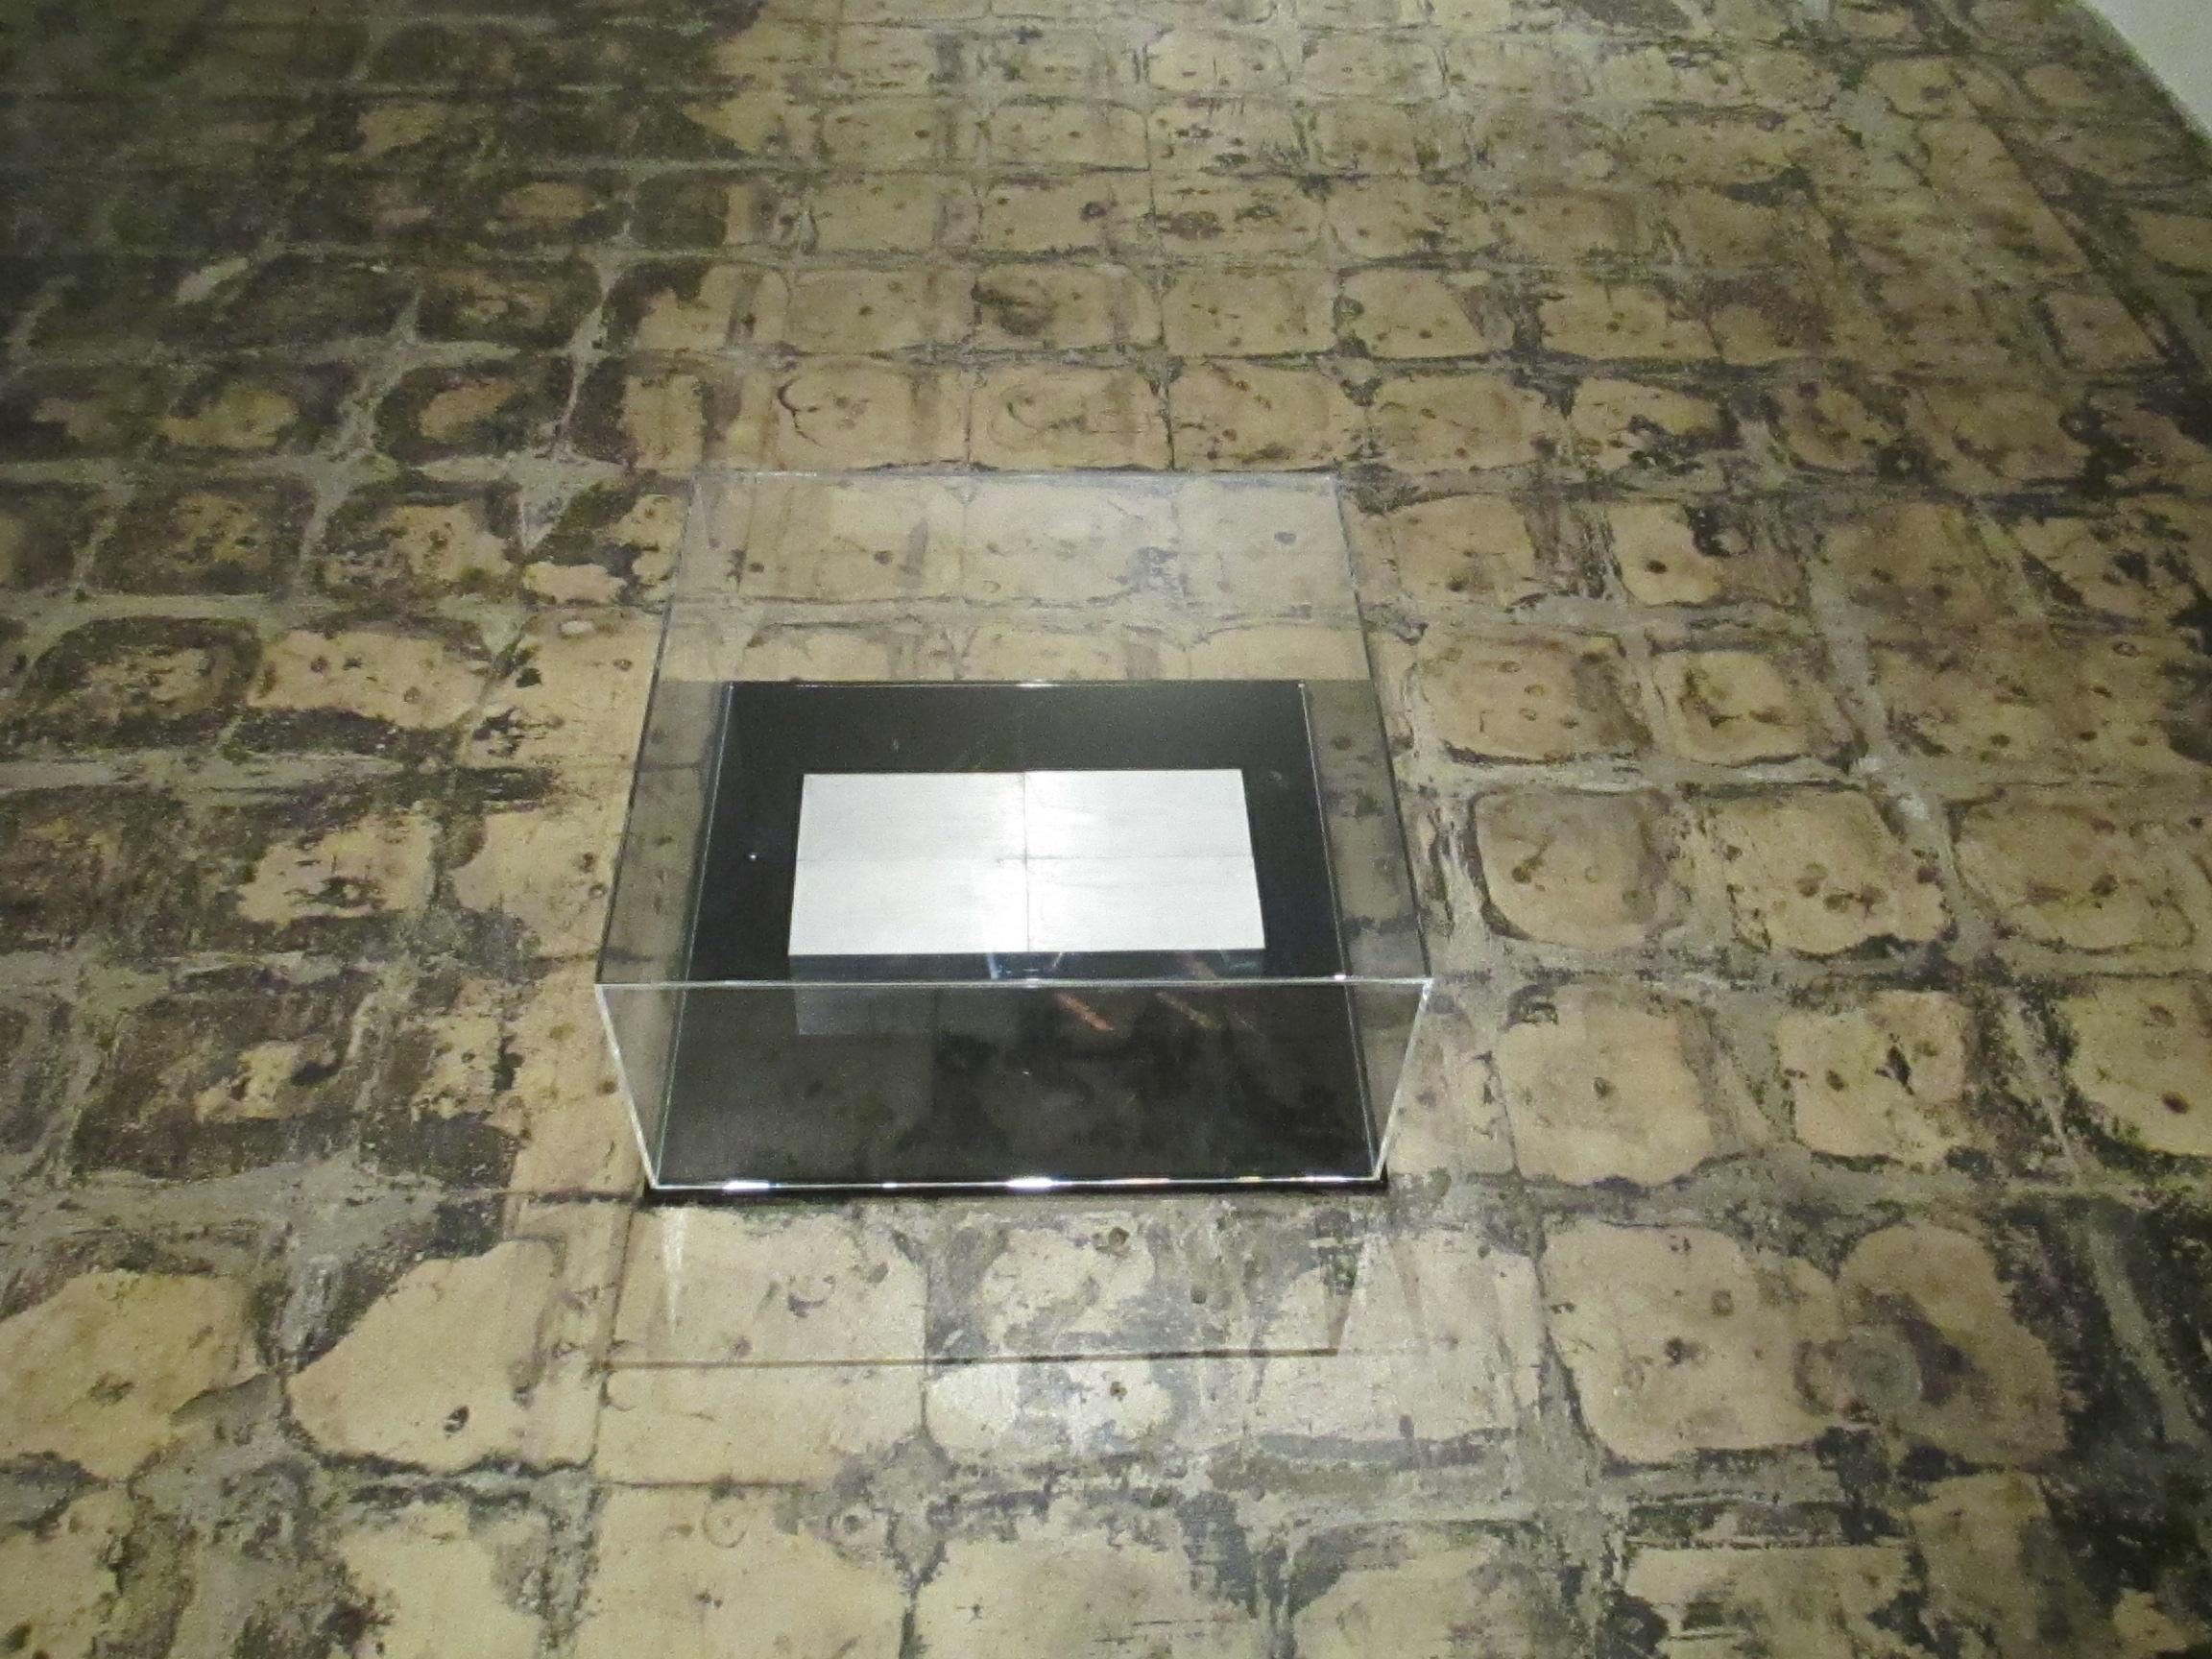 Al 4 Blocks aluminum, in 4 parts - Abstract Geometric Sculpture by Carl Andre